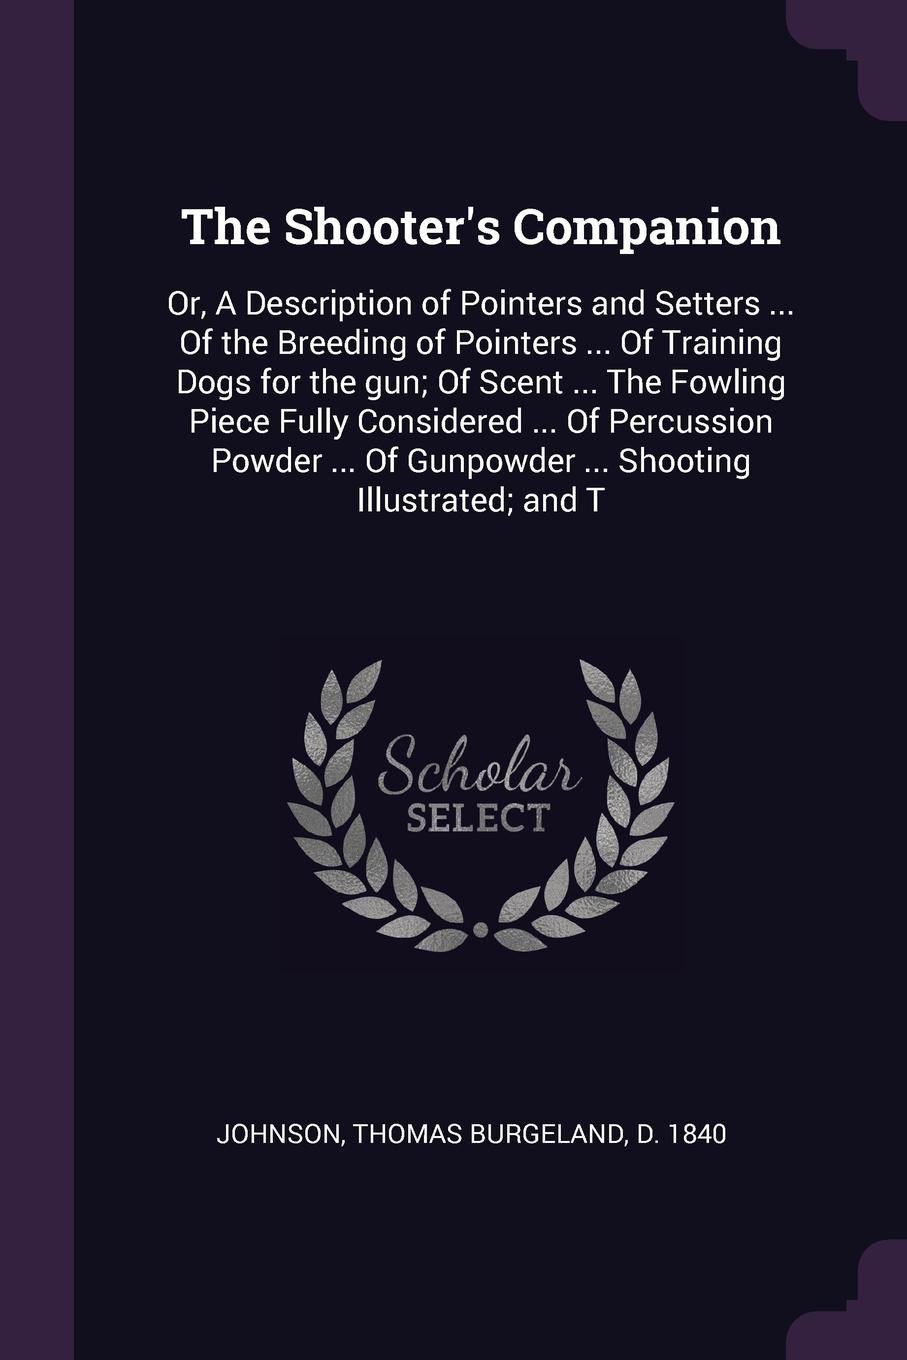 The Shooter`s Companion. Or, A Description of Pointers and Setters ... Of the Breeding of Pointers ... Of Training Dogs for the gun; Of Scent ... The Fowling Piece Fully Considered ... Of Percussion Powder ... Of Gunpowder ... Shooting Illustrated...